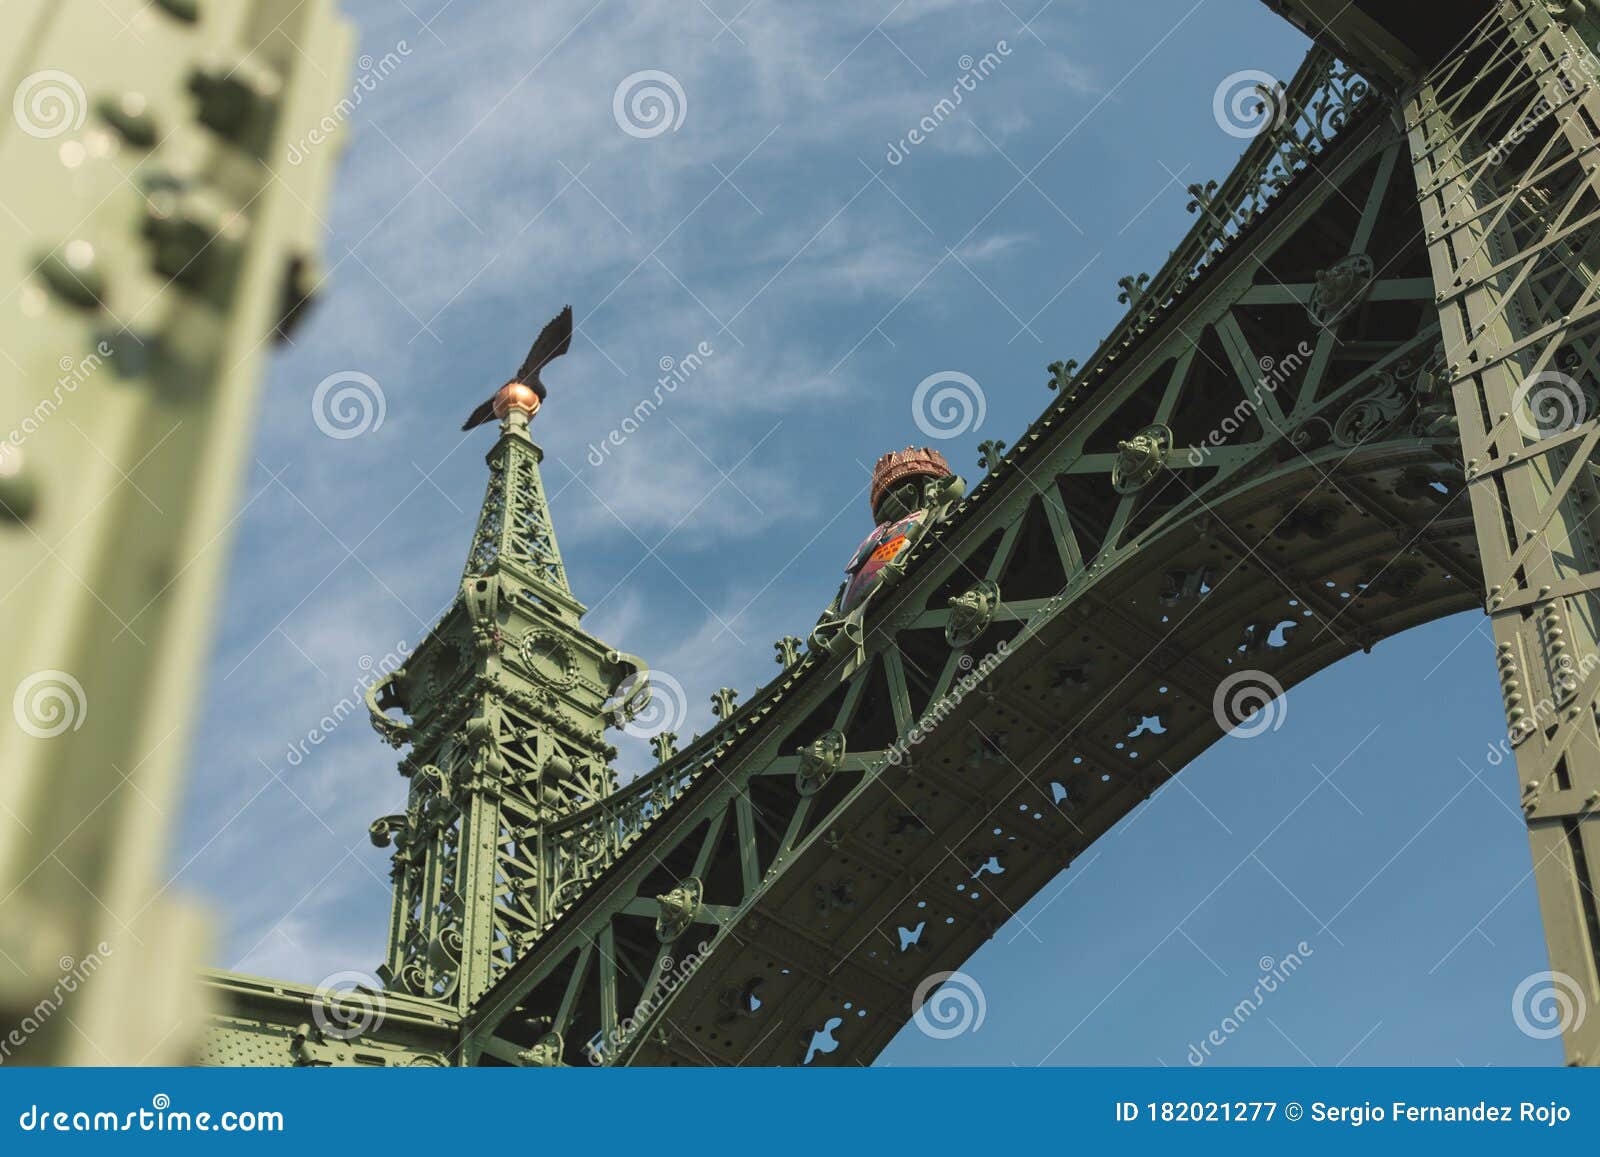 detail view of the liberty bridge, in budapest, hungary